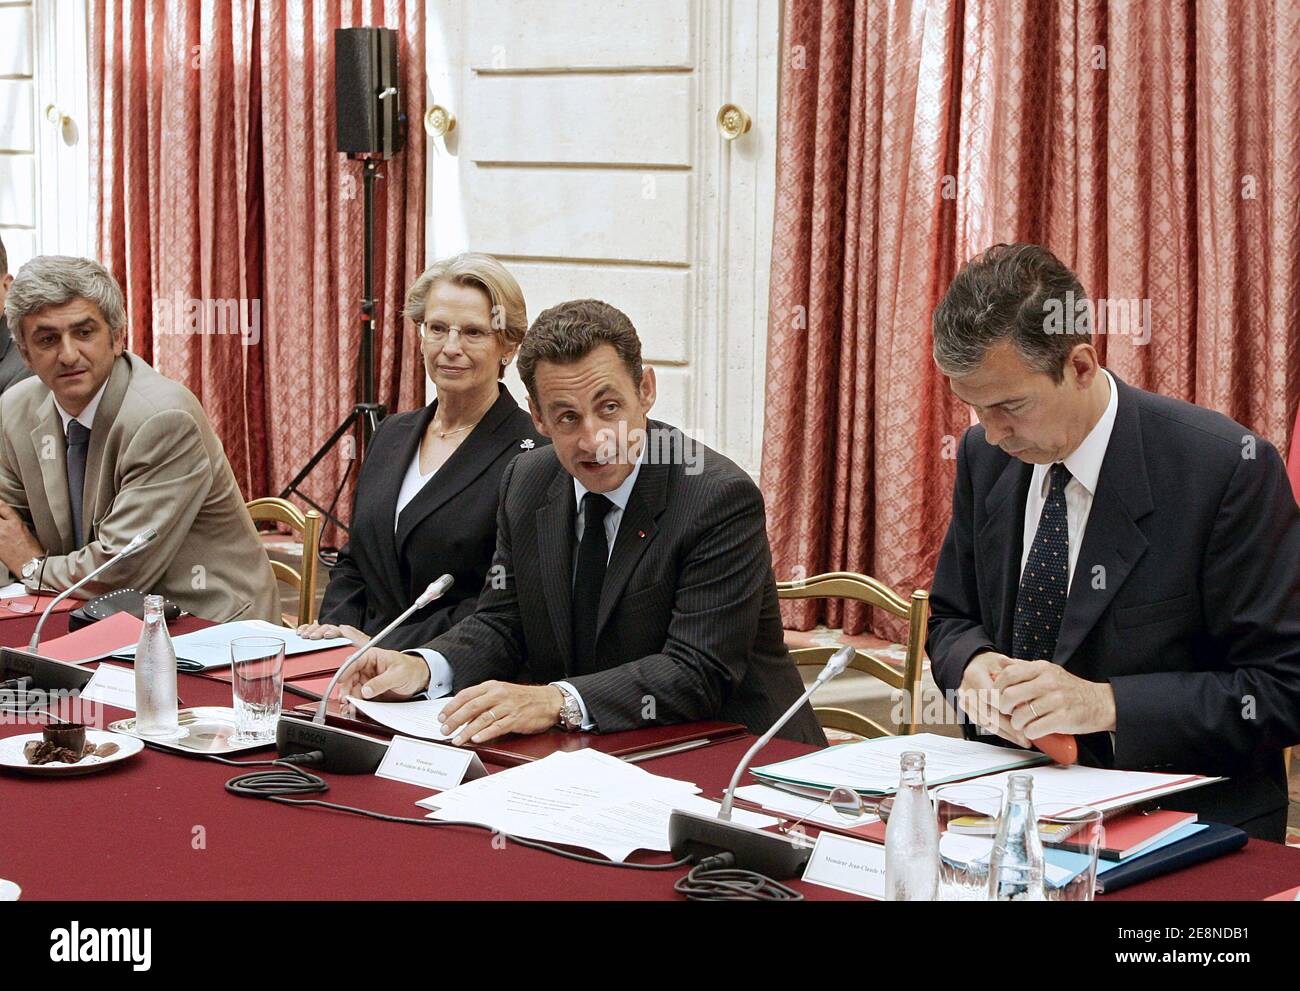 Minister for Defence Herve Morin (L), Michele Alliot-Marie, Minister of the  Interior, France's President Nicolas Sarkozy , Jean-Claude Mallet (R),  State Advisor, attend the opening of the Mallet commission for Defense and